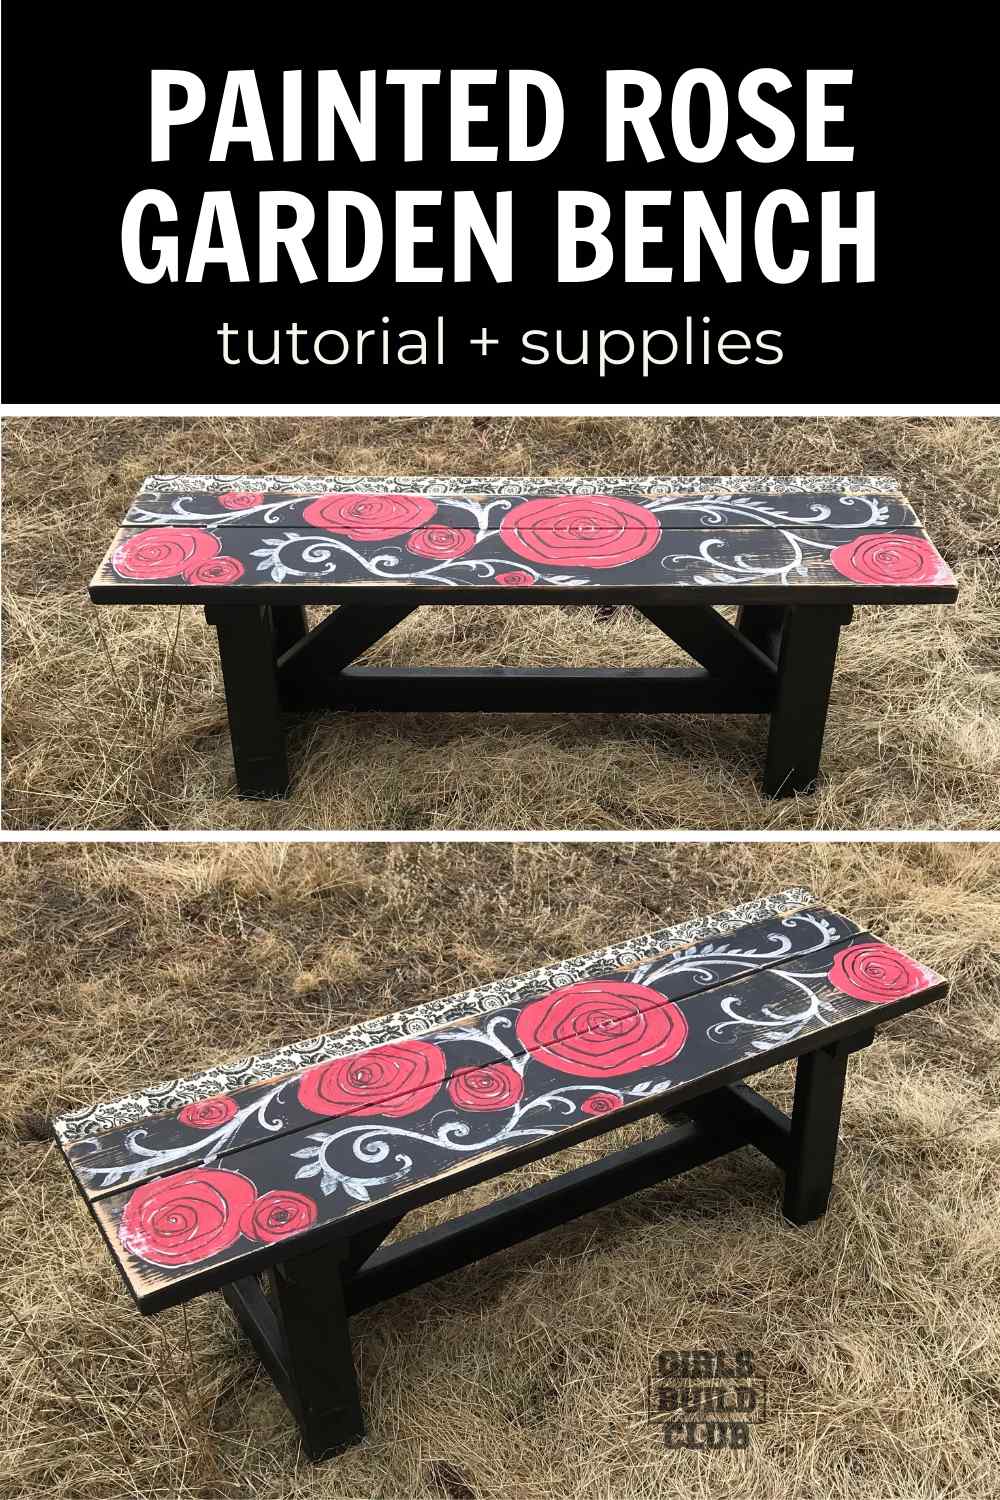 Let's paint the rose garden bench! I'll show you how to paint this floral motif on your furniture, the paint i used, and then decoupage some paper accents on it, too. It's not that hard! and I only used craft paint. :) Fun eclectic boho decor diy